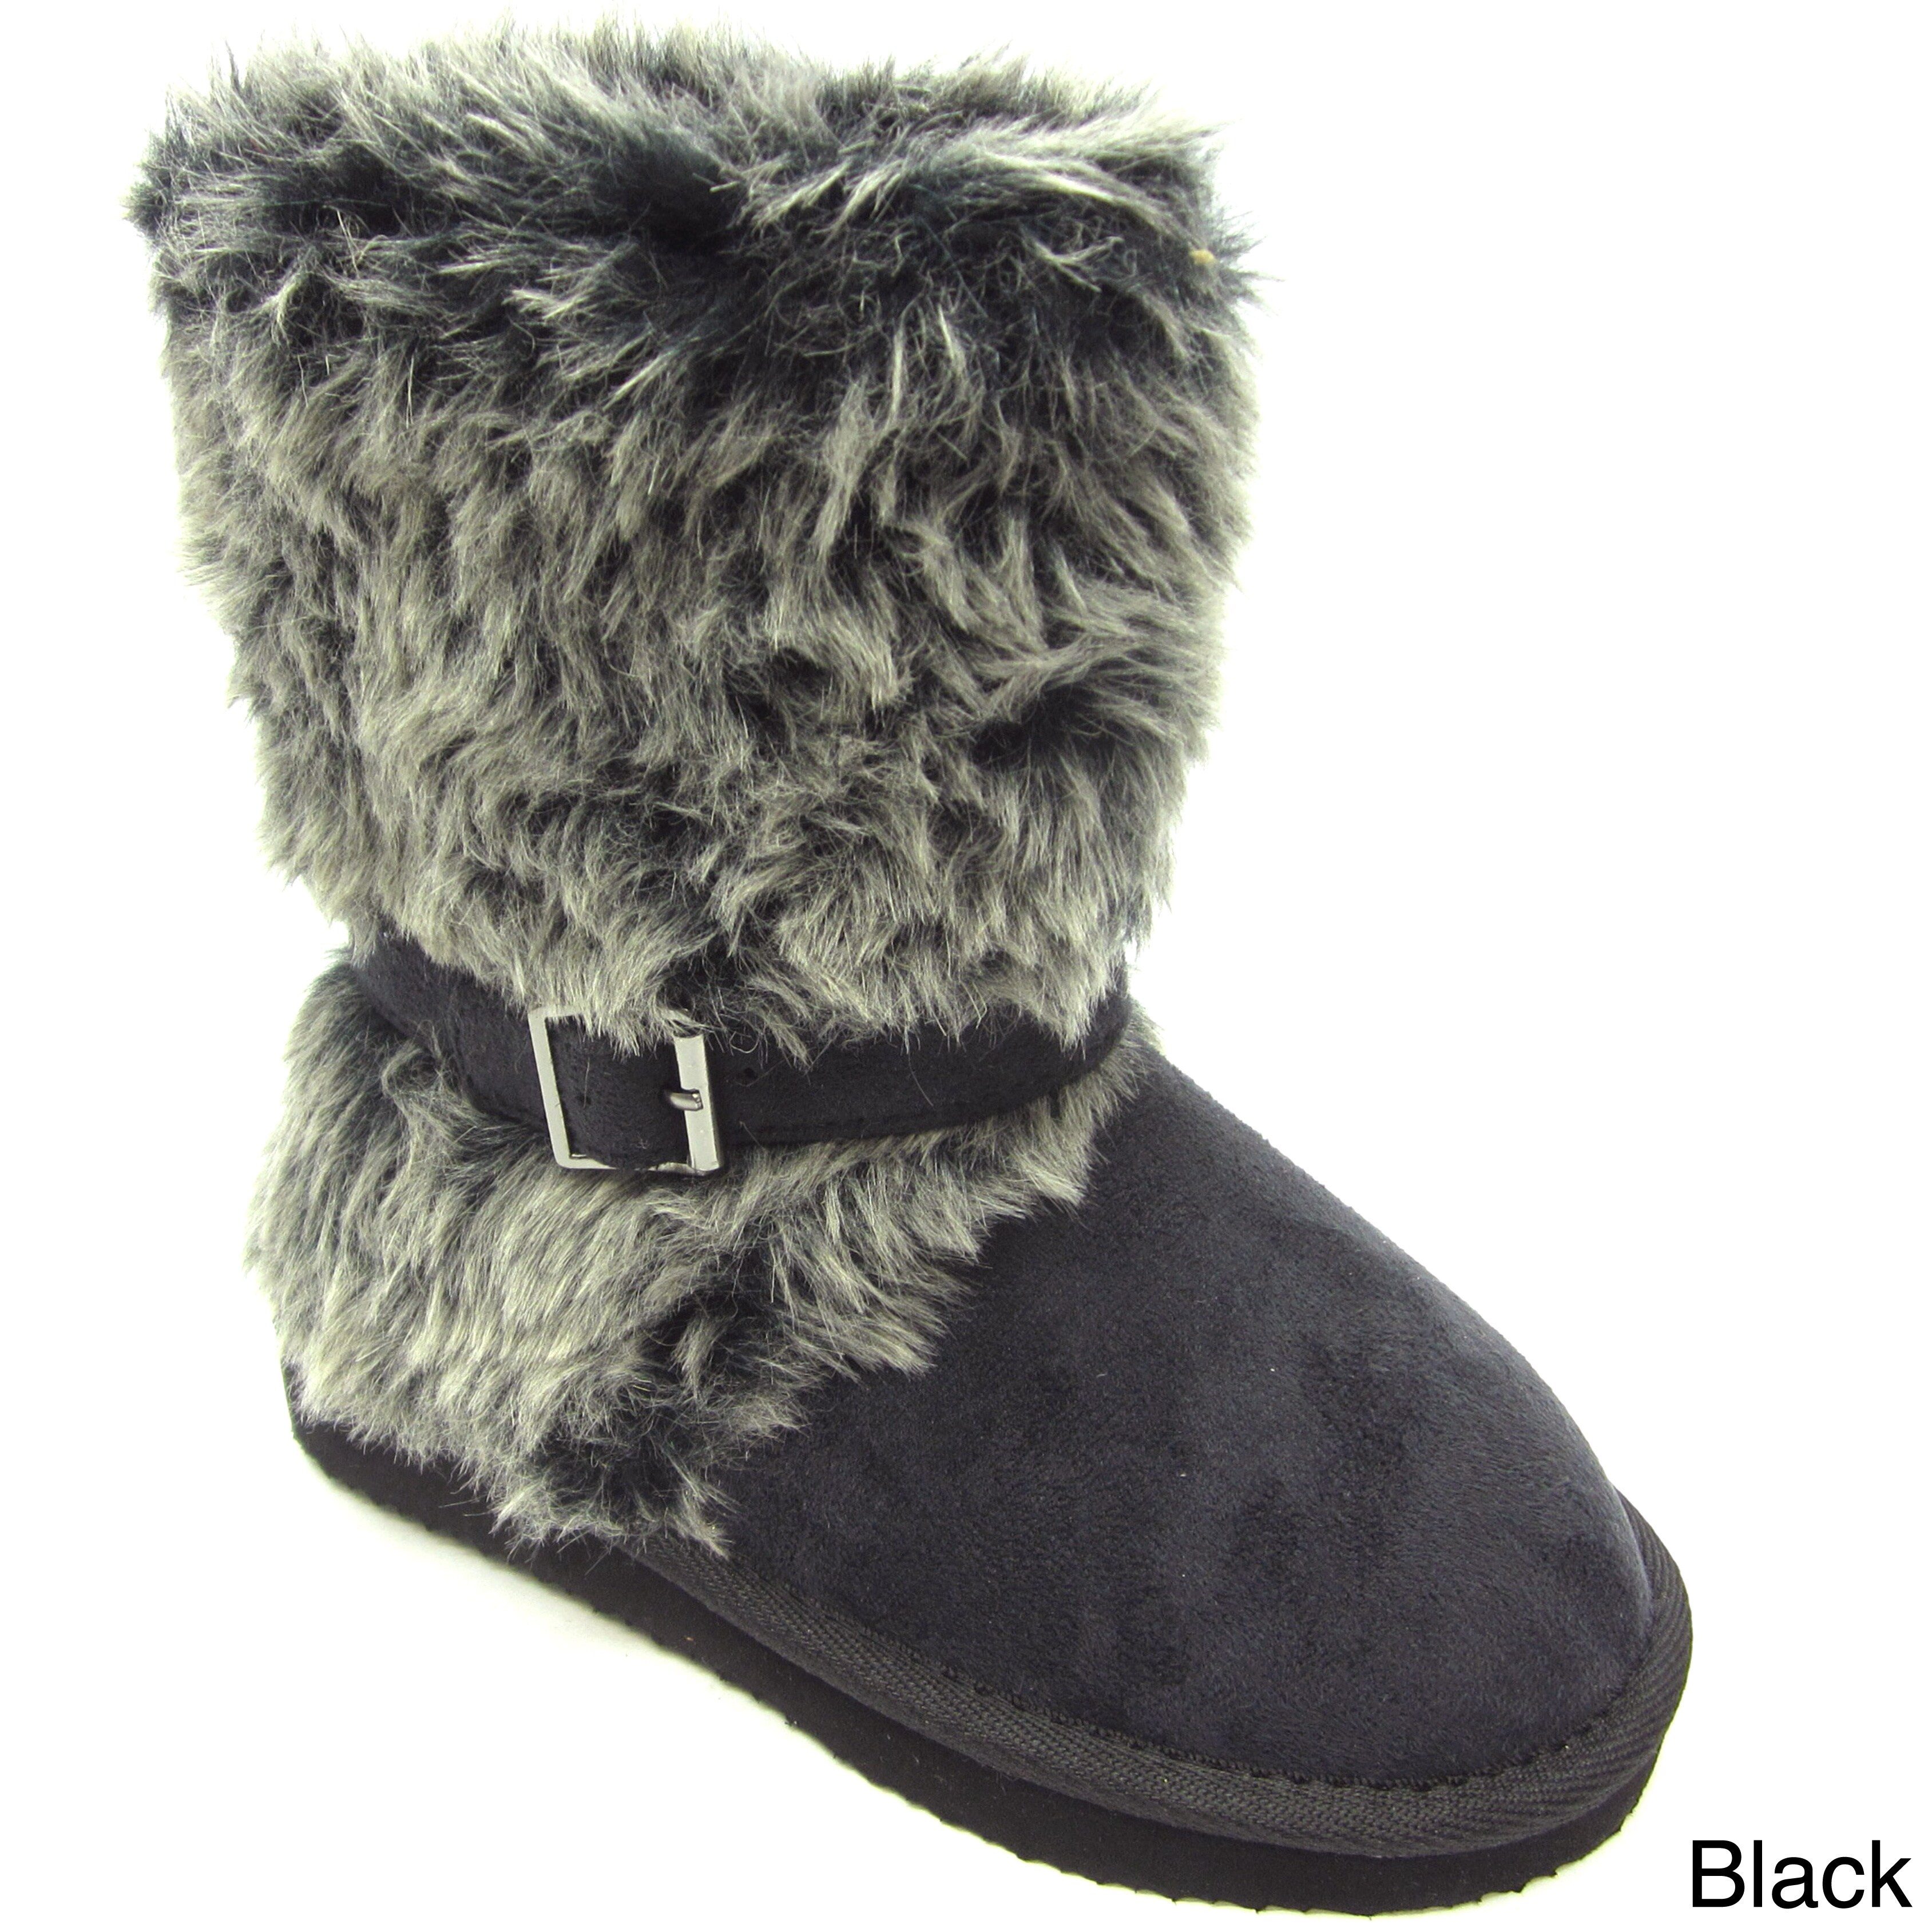 childrens furry boots